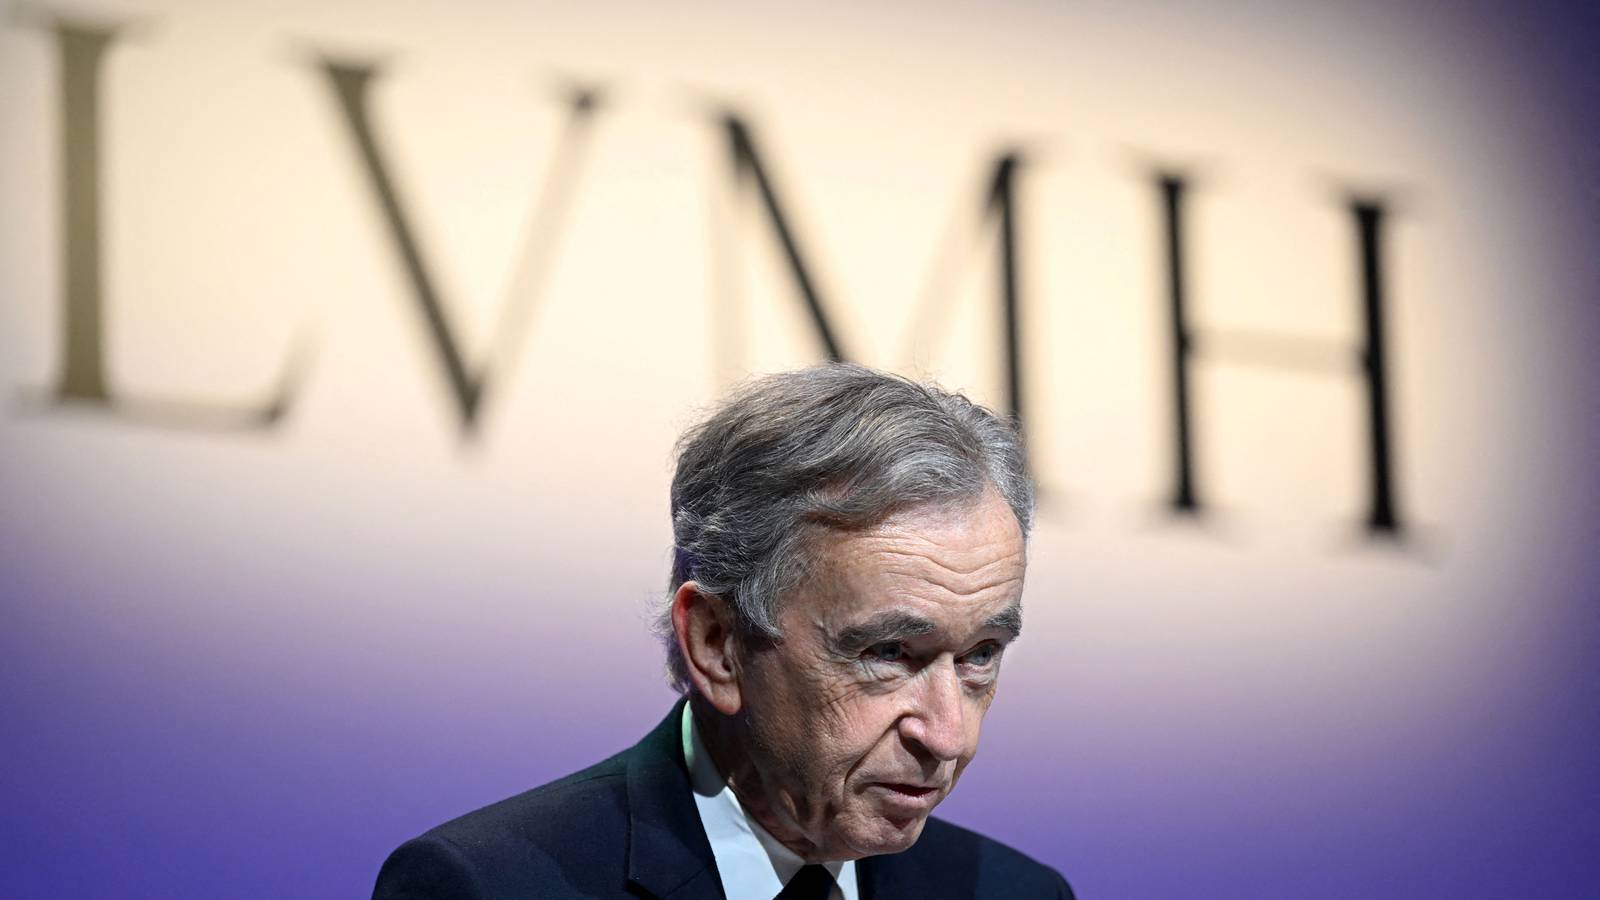 LVMH becomes first European company to hit $500bn market value